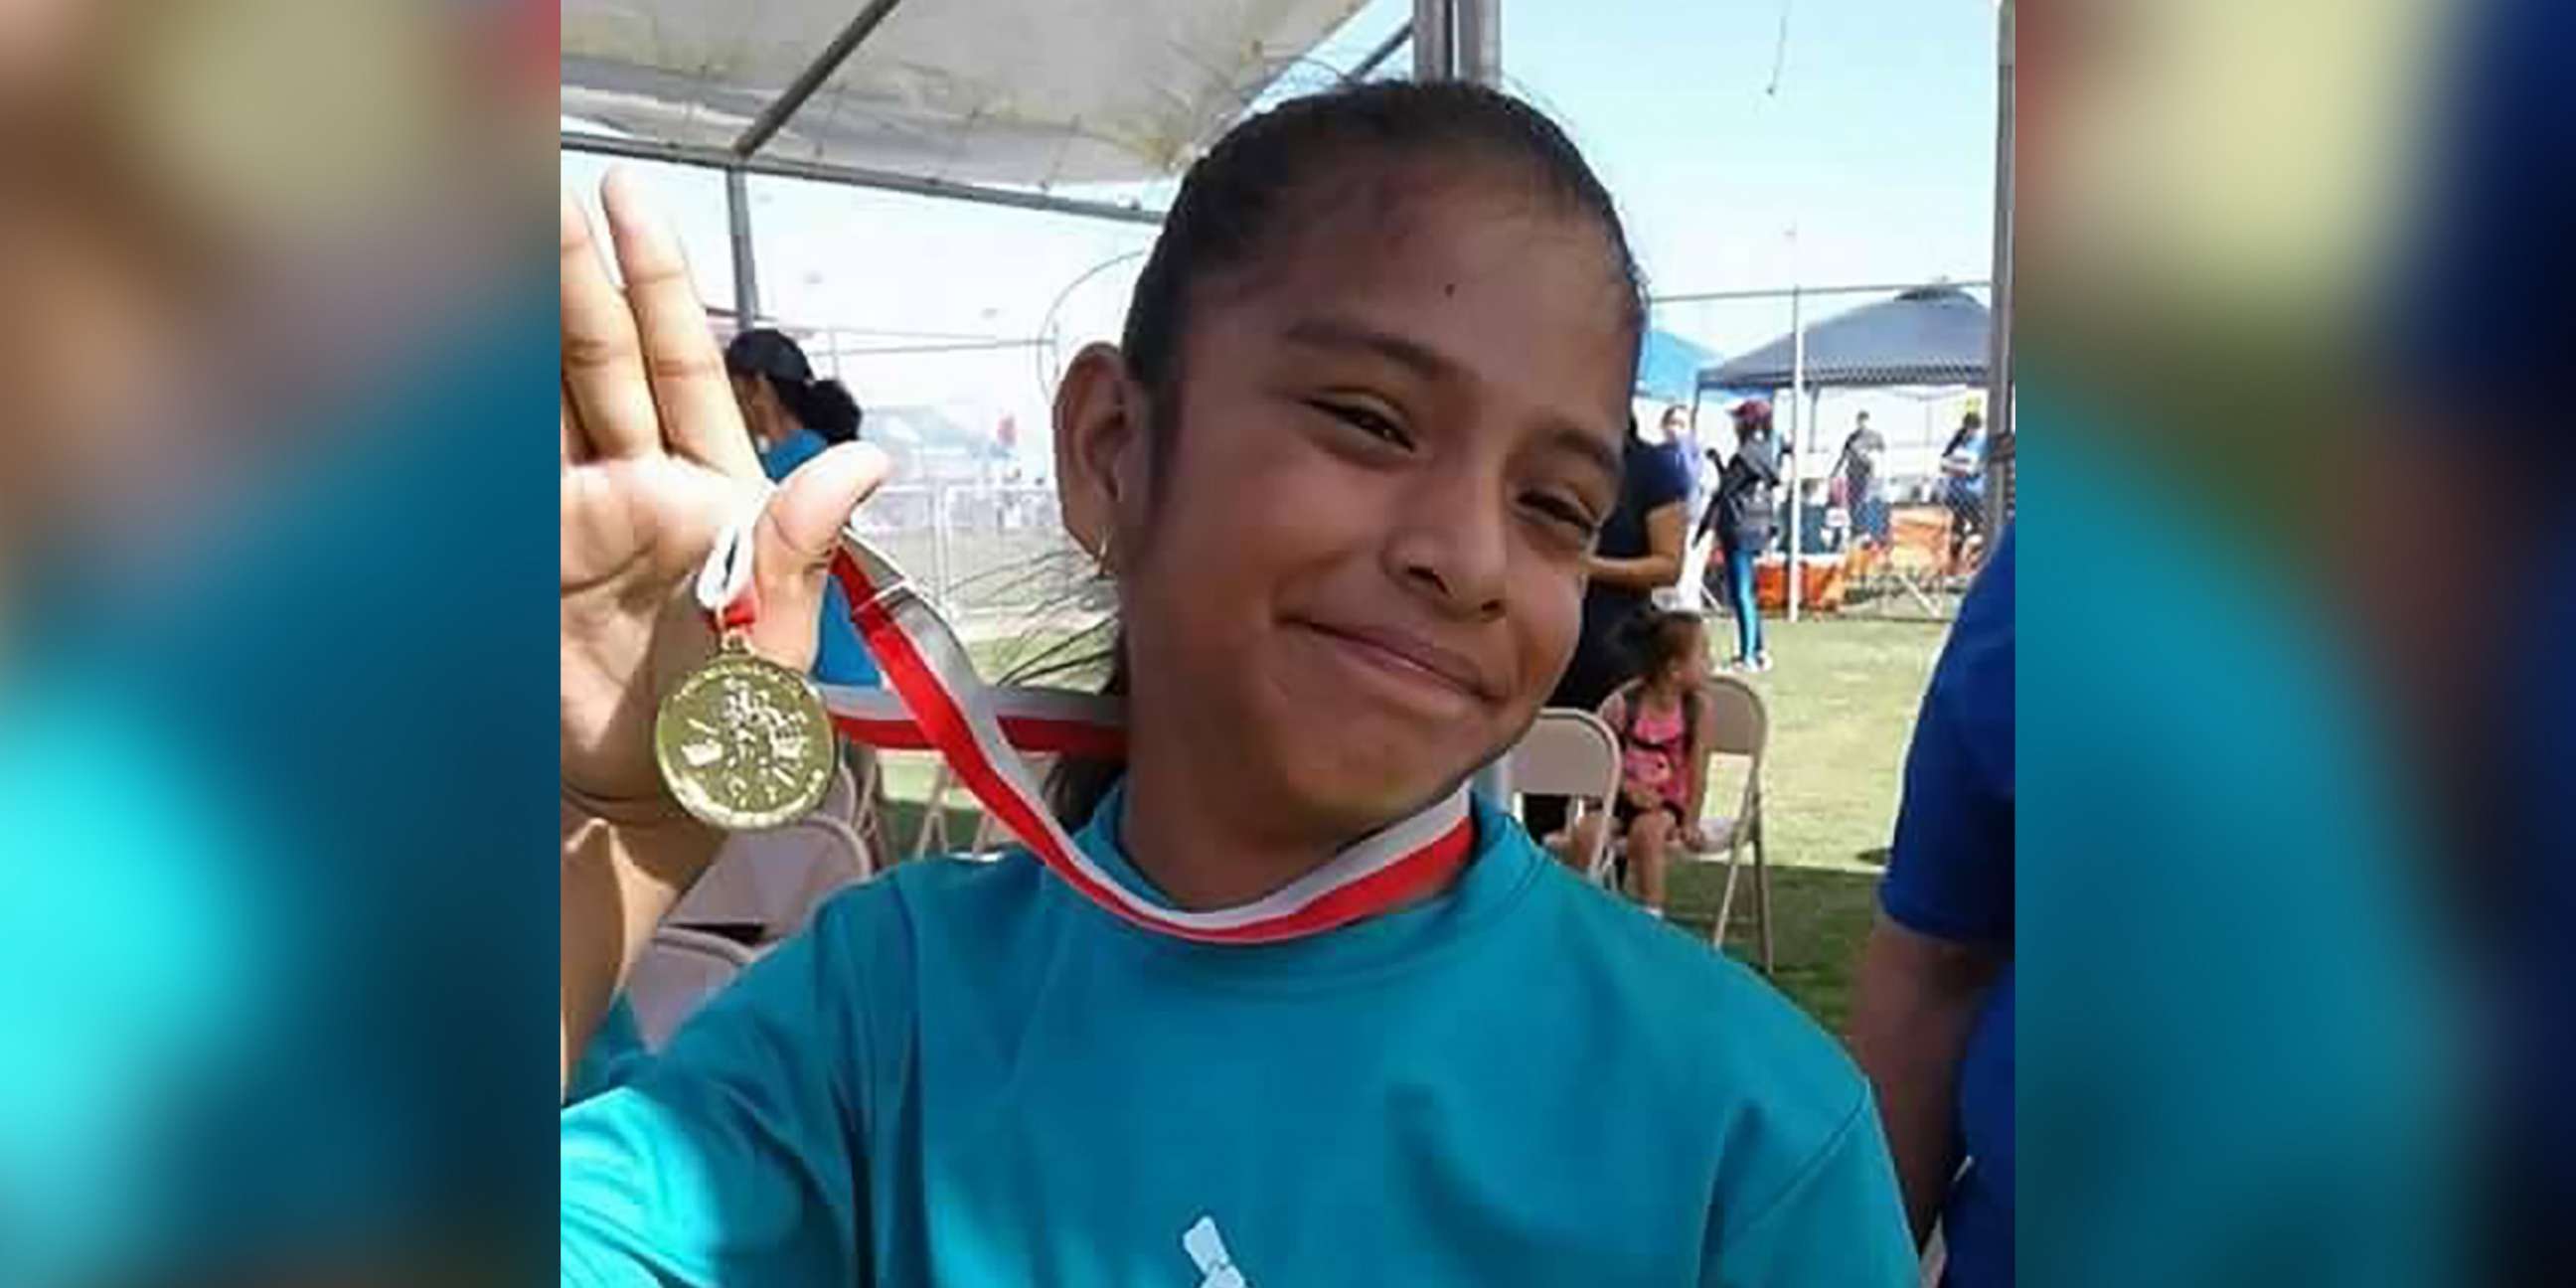 PHOTO: Rosa Maria Hernandez, 10, who has cerebral palsy, was detained by Border Patrol agents after undergoing surgery on Oct. 24, 2017. 